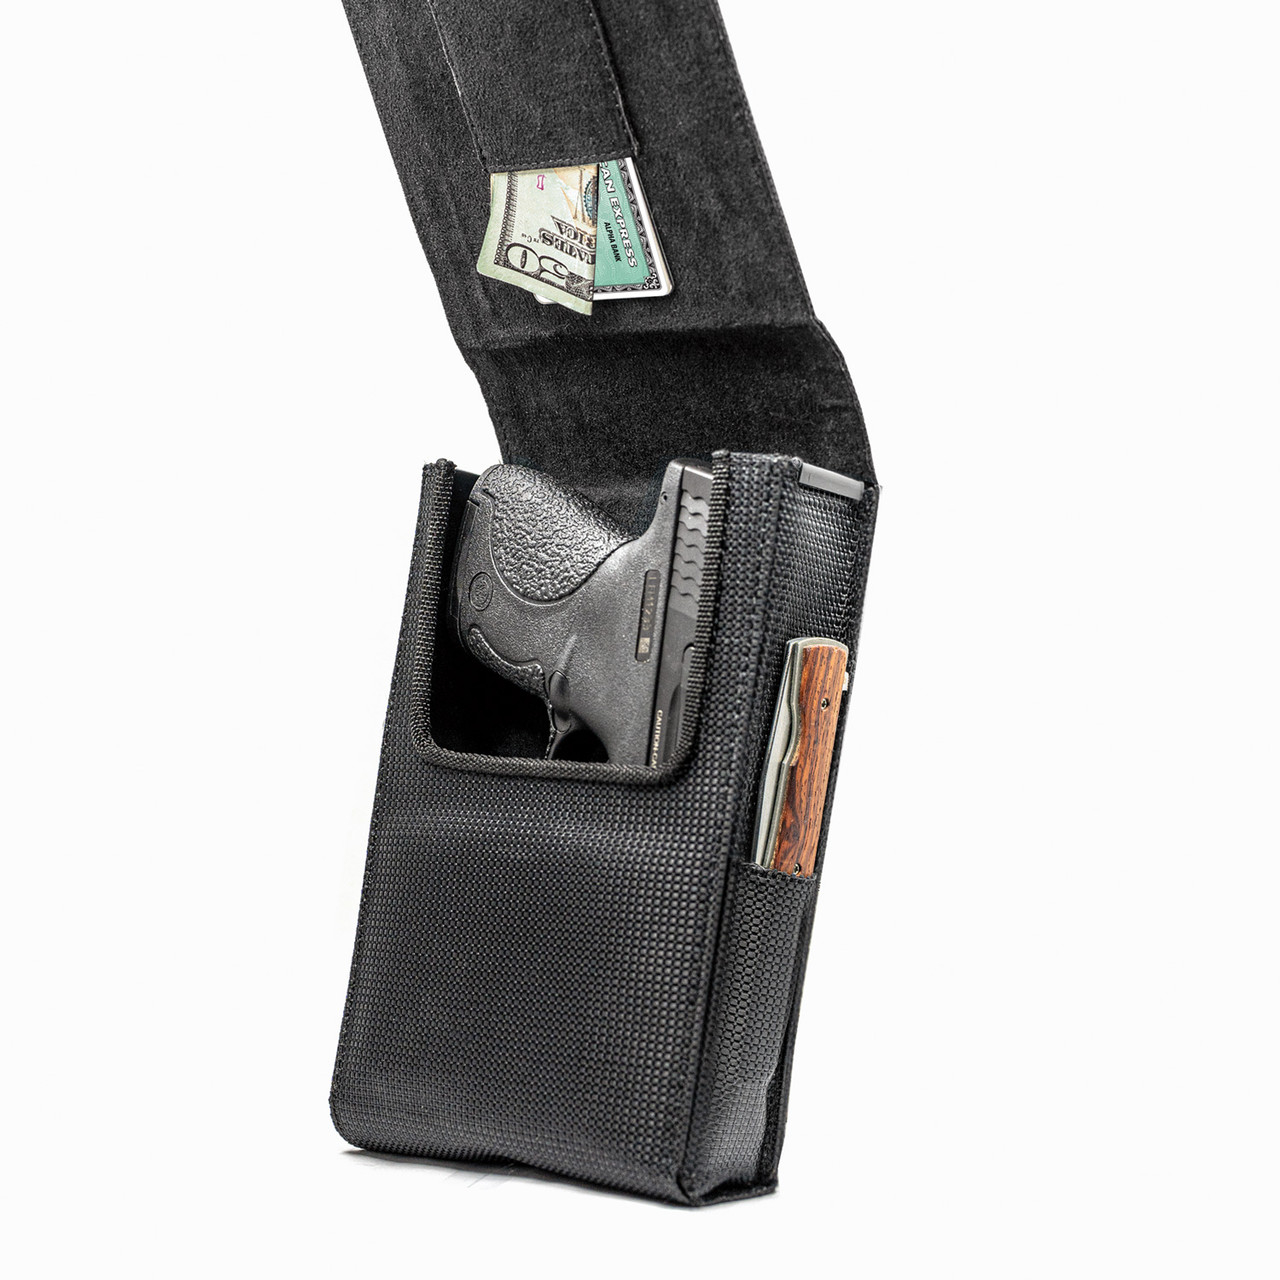 The Sig P365 Perfect Holster